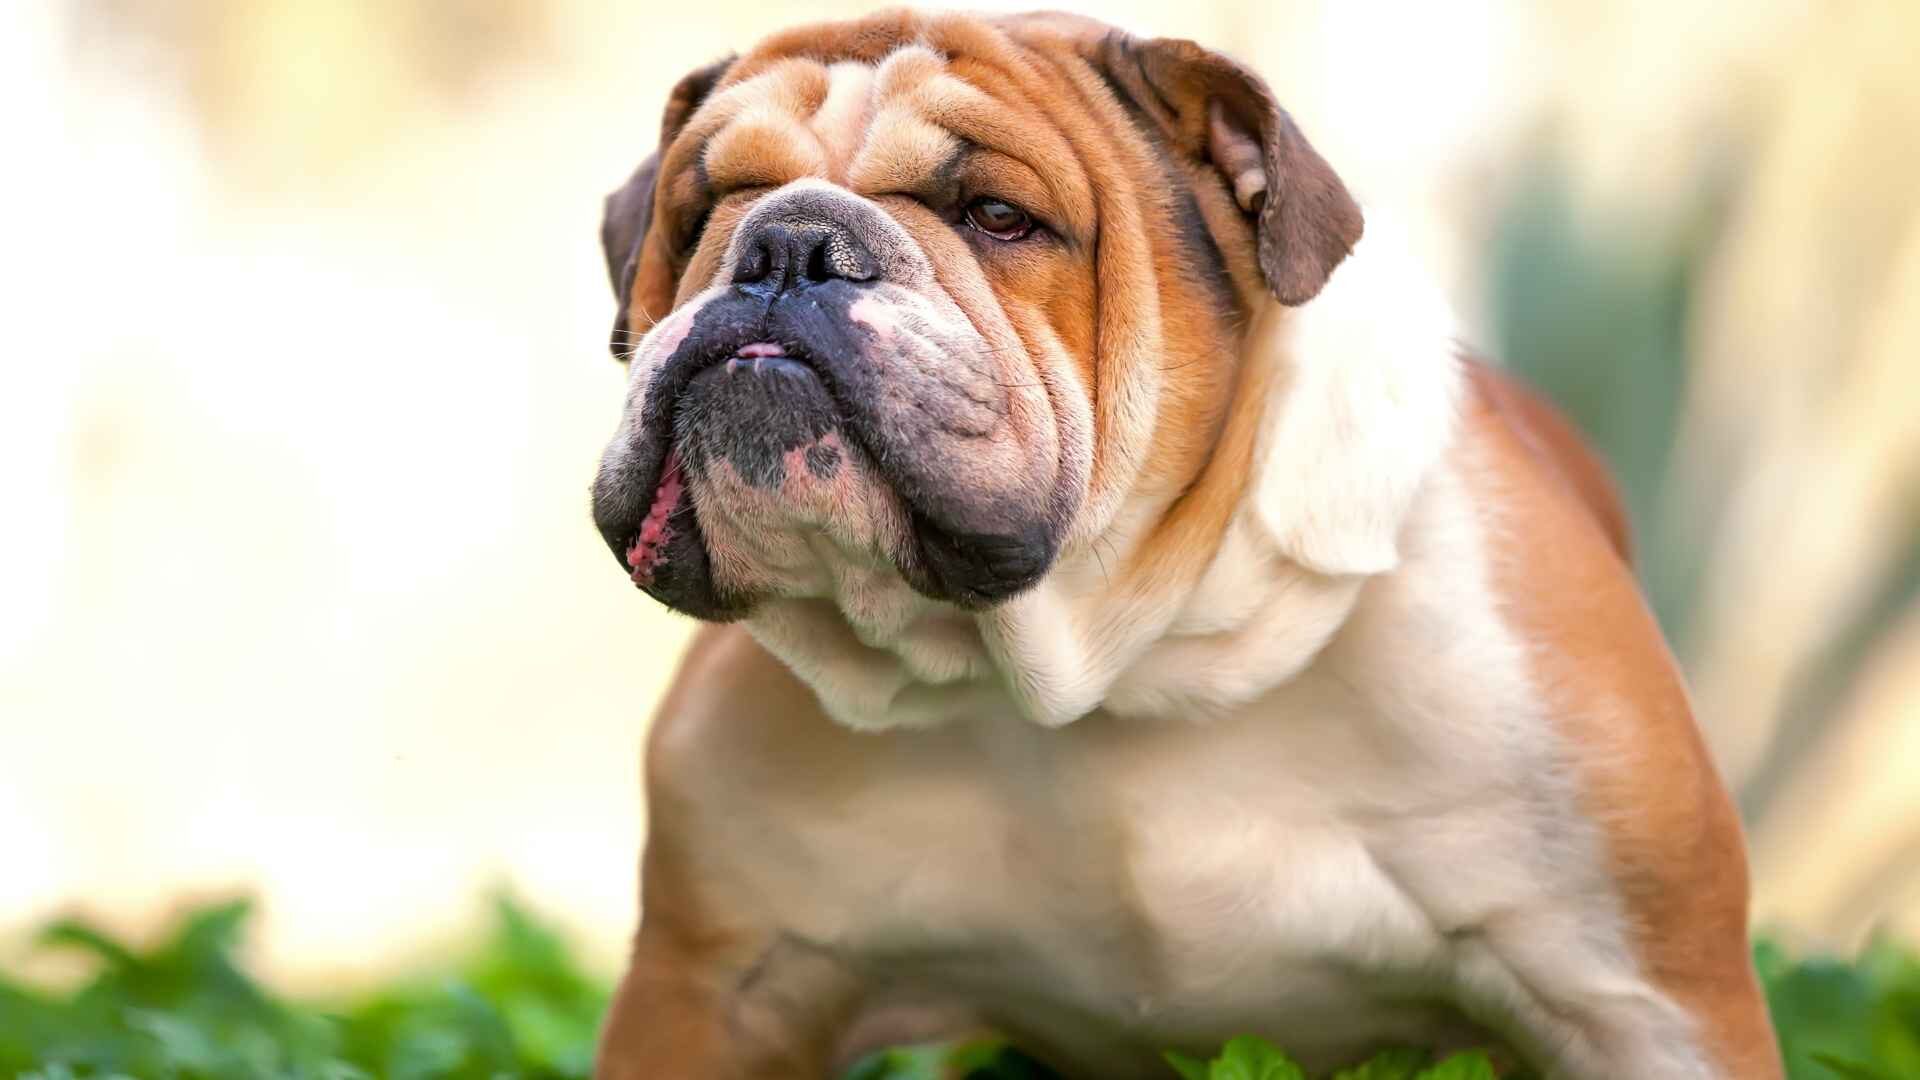 Are English Bulldogs Born with Long Tail or Are They Docked?